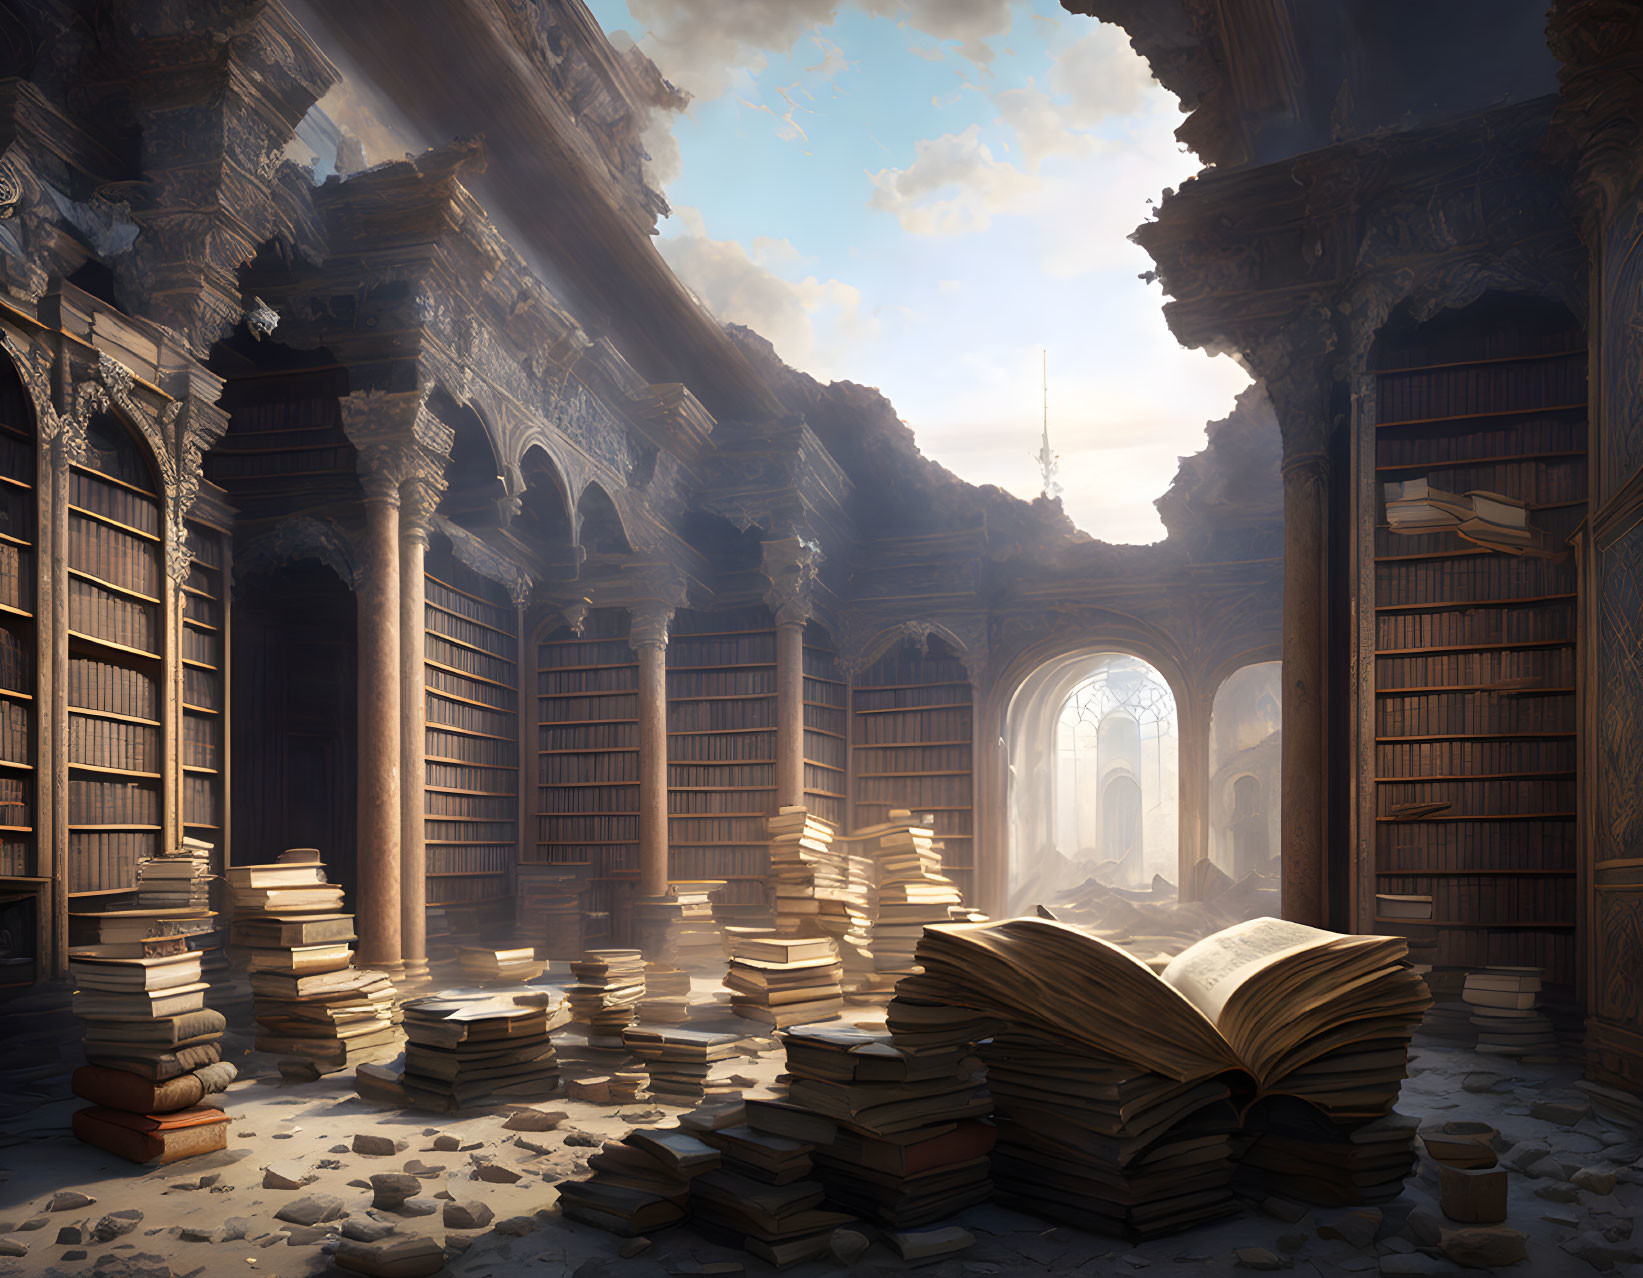 Vast ancient library with towering bookshelves and open tome